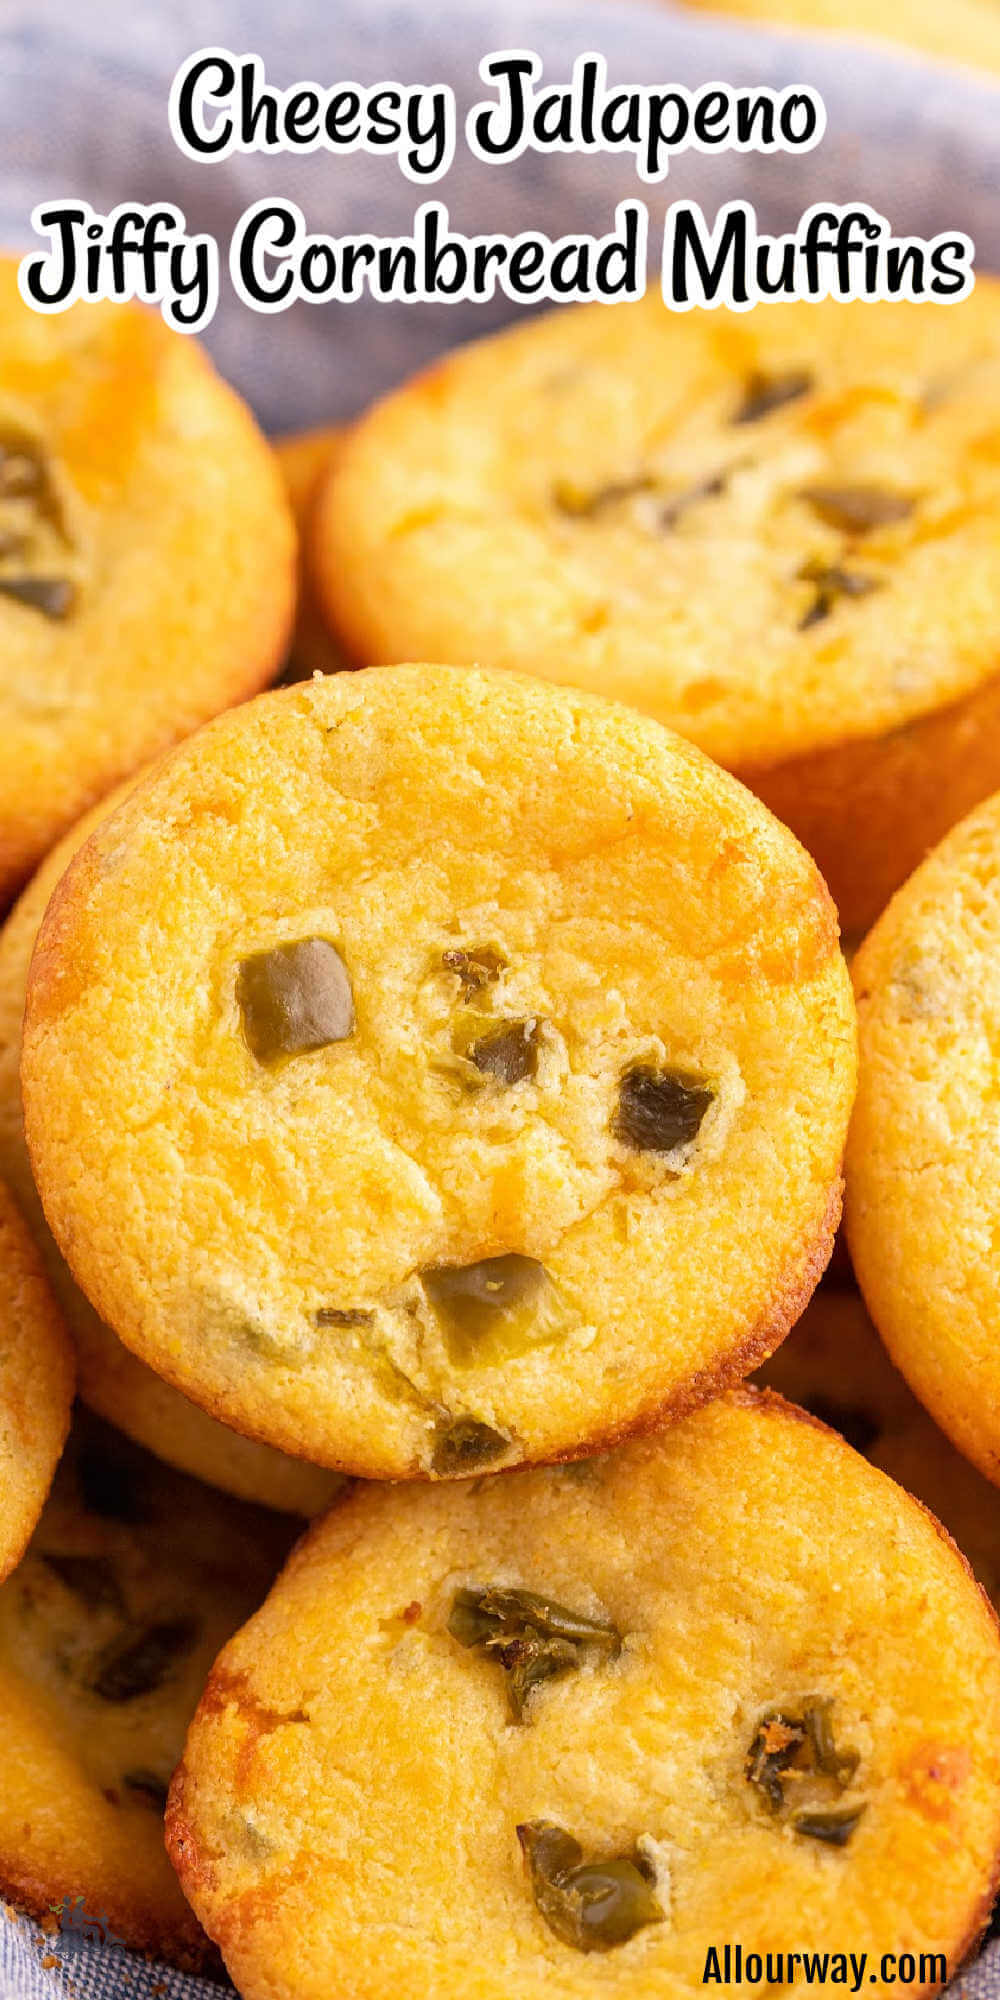 Jiffy jalapeño cornbread muffins are super easy to make and are rich with flavor. The combination of cheddar cheese, jalapeños make them flavorful and the sour cream keeps them moist. Make them ahead and freeze then enjoy them whenever you have the craving.